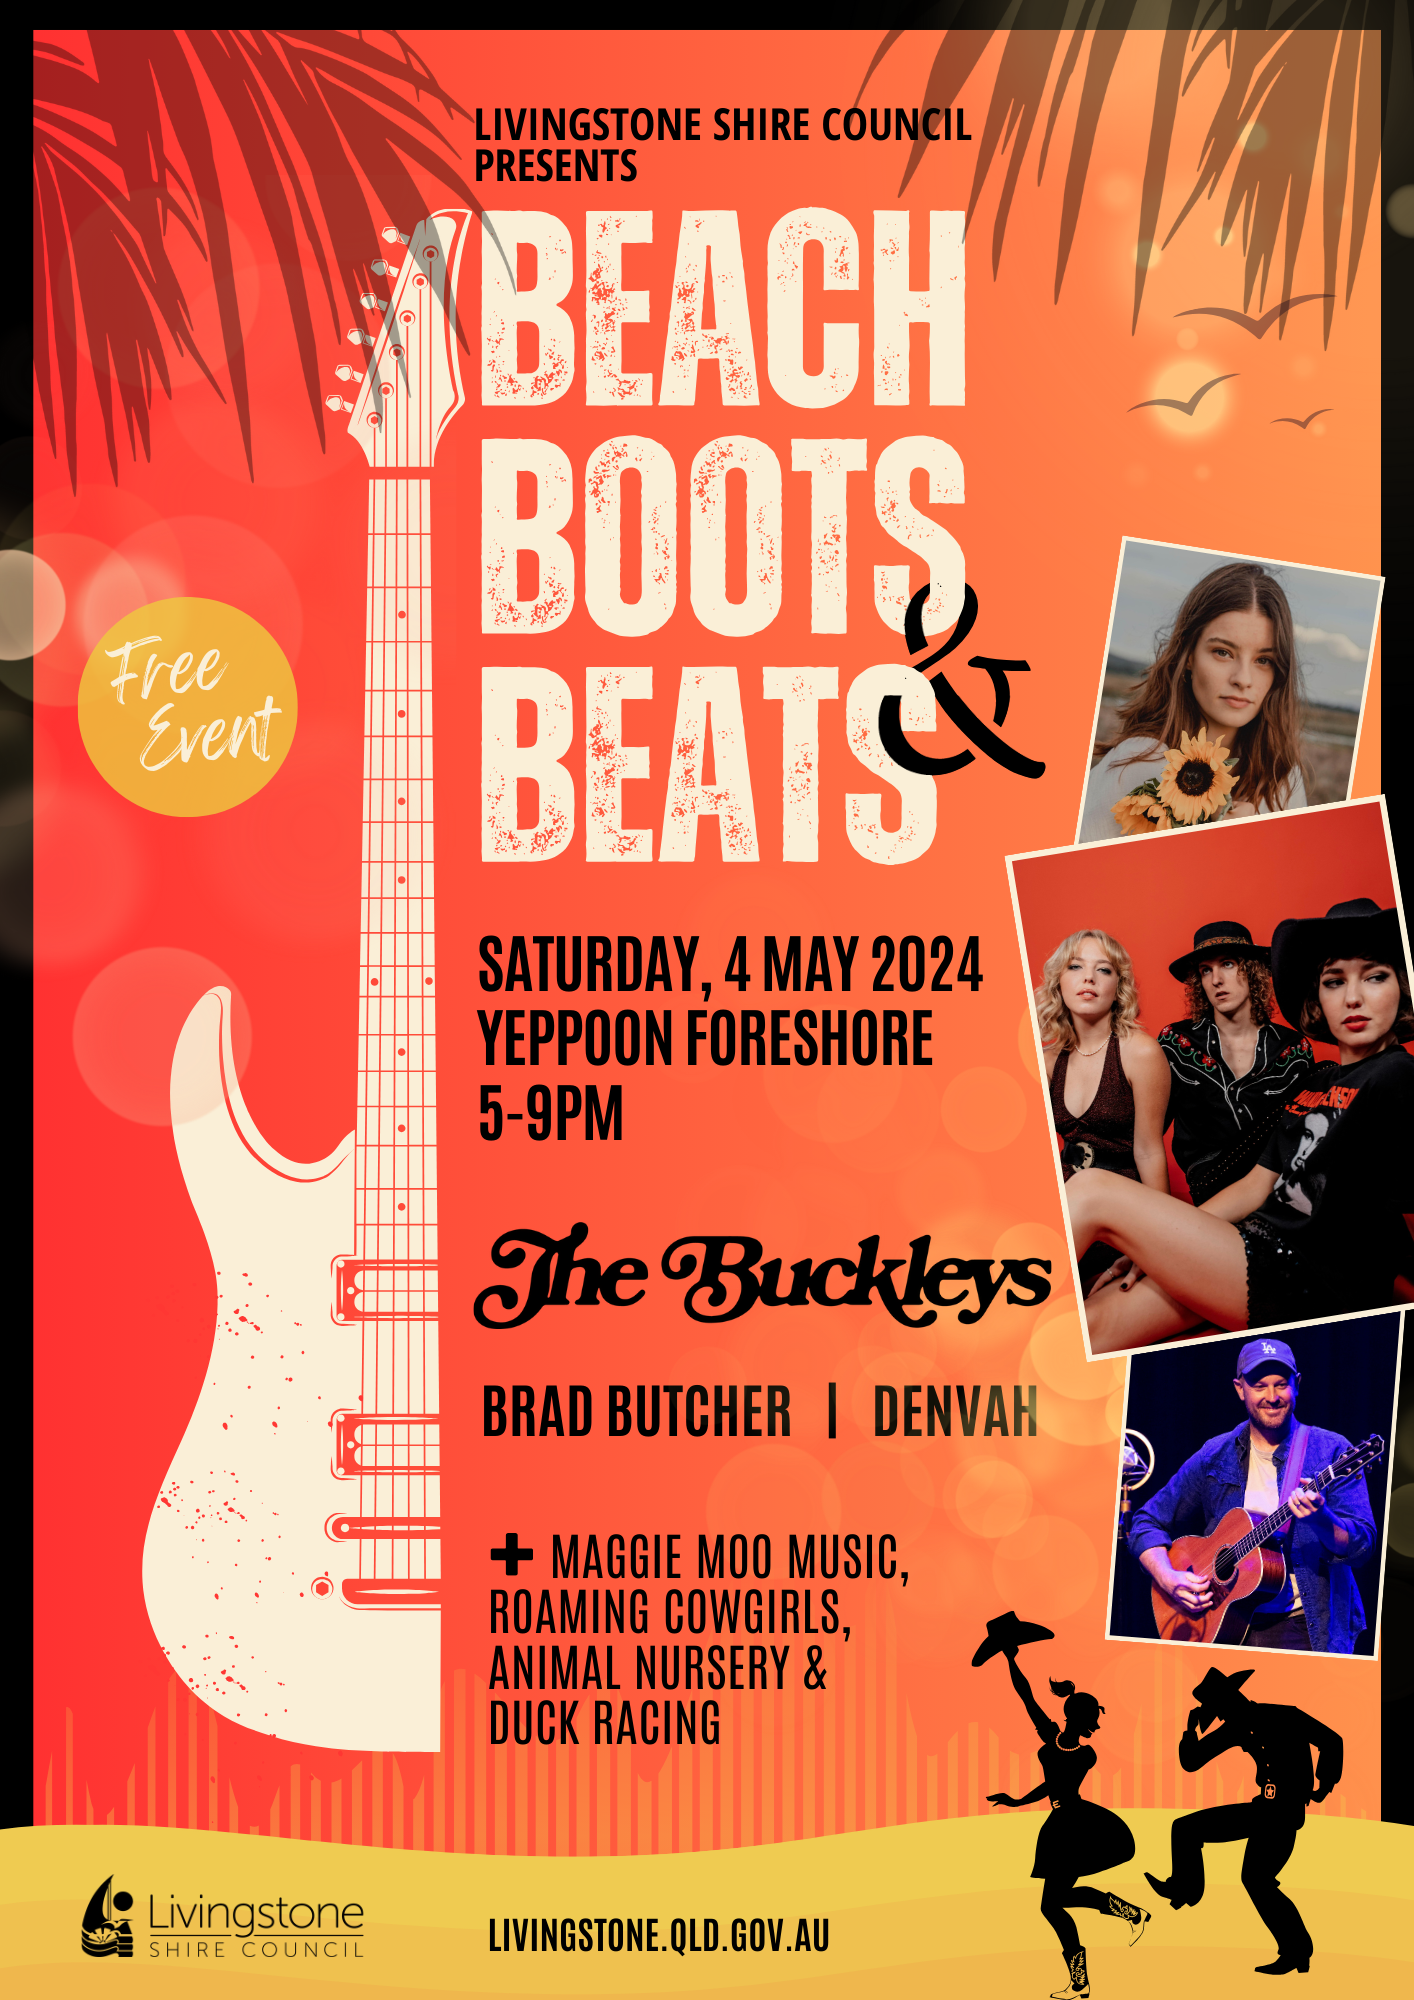 Beach boots and beats poster a3 1